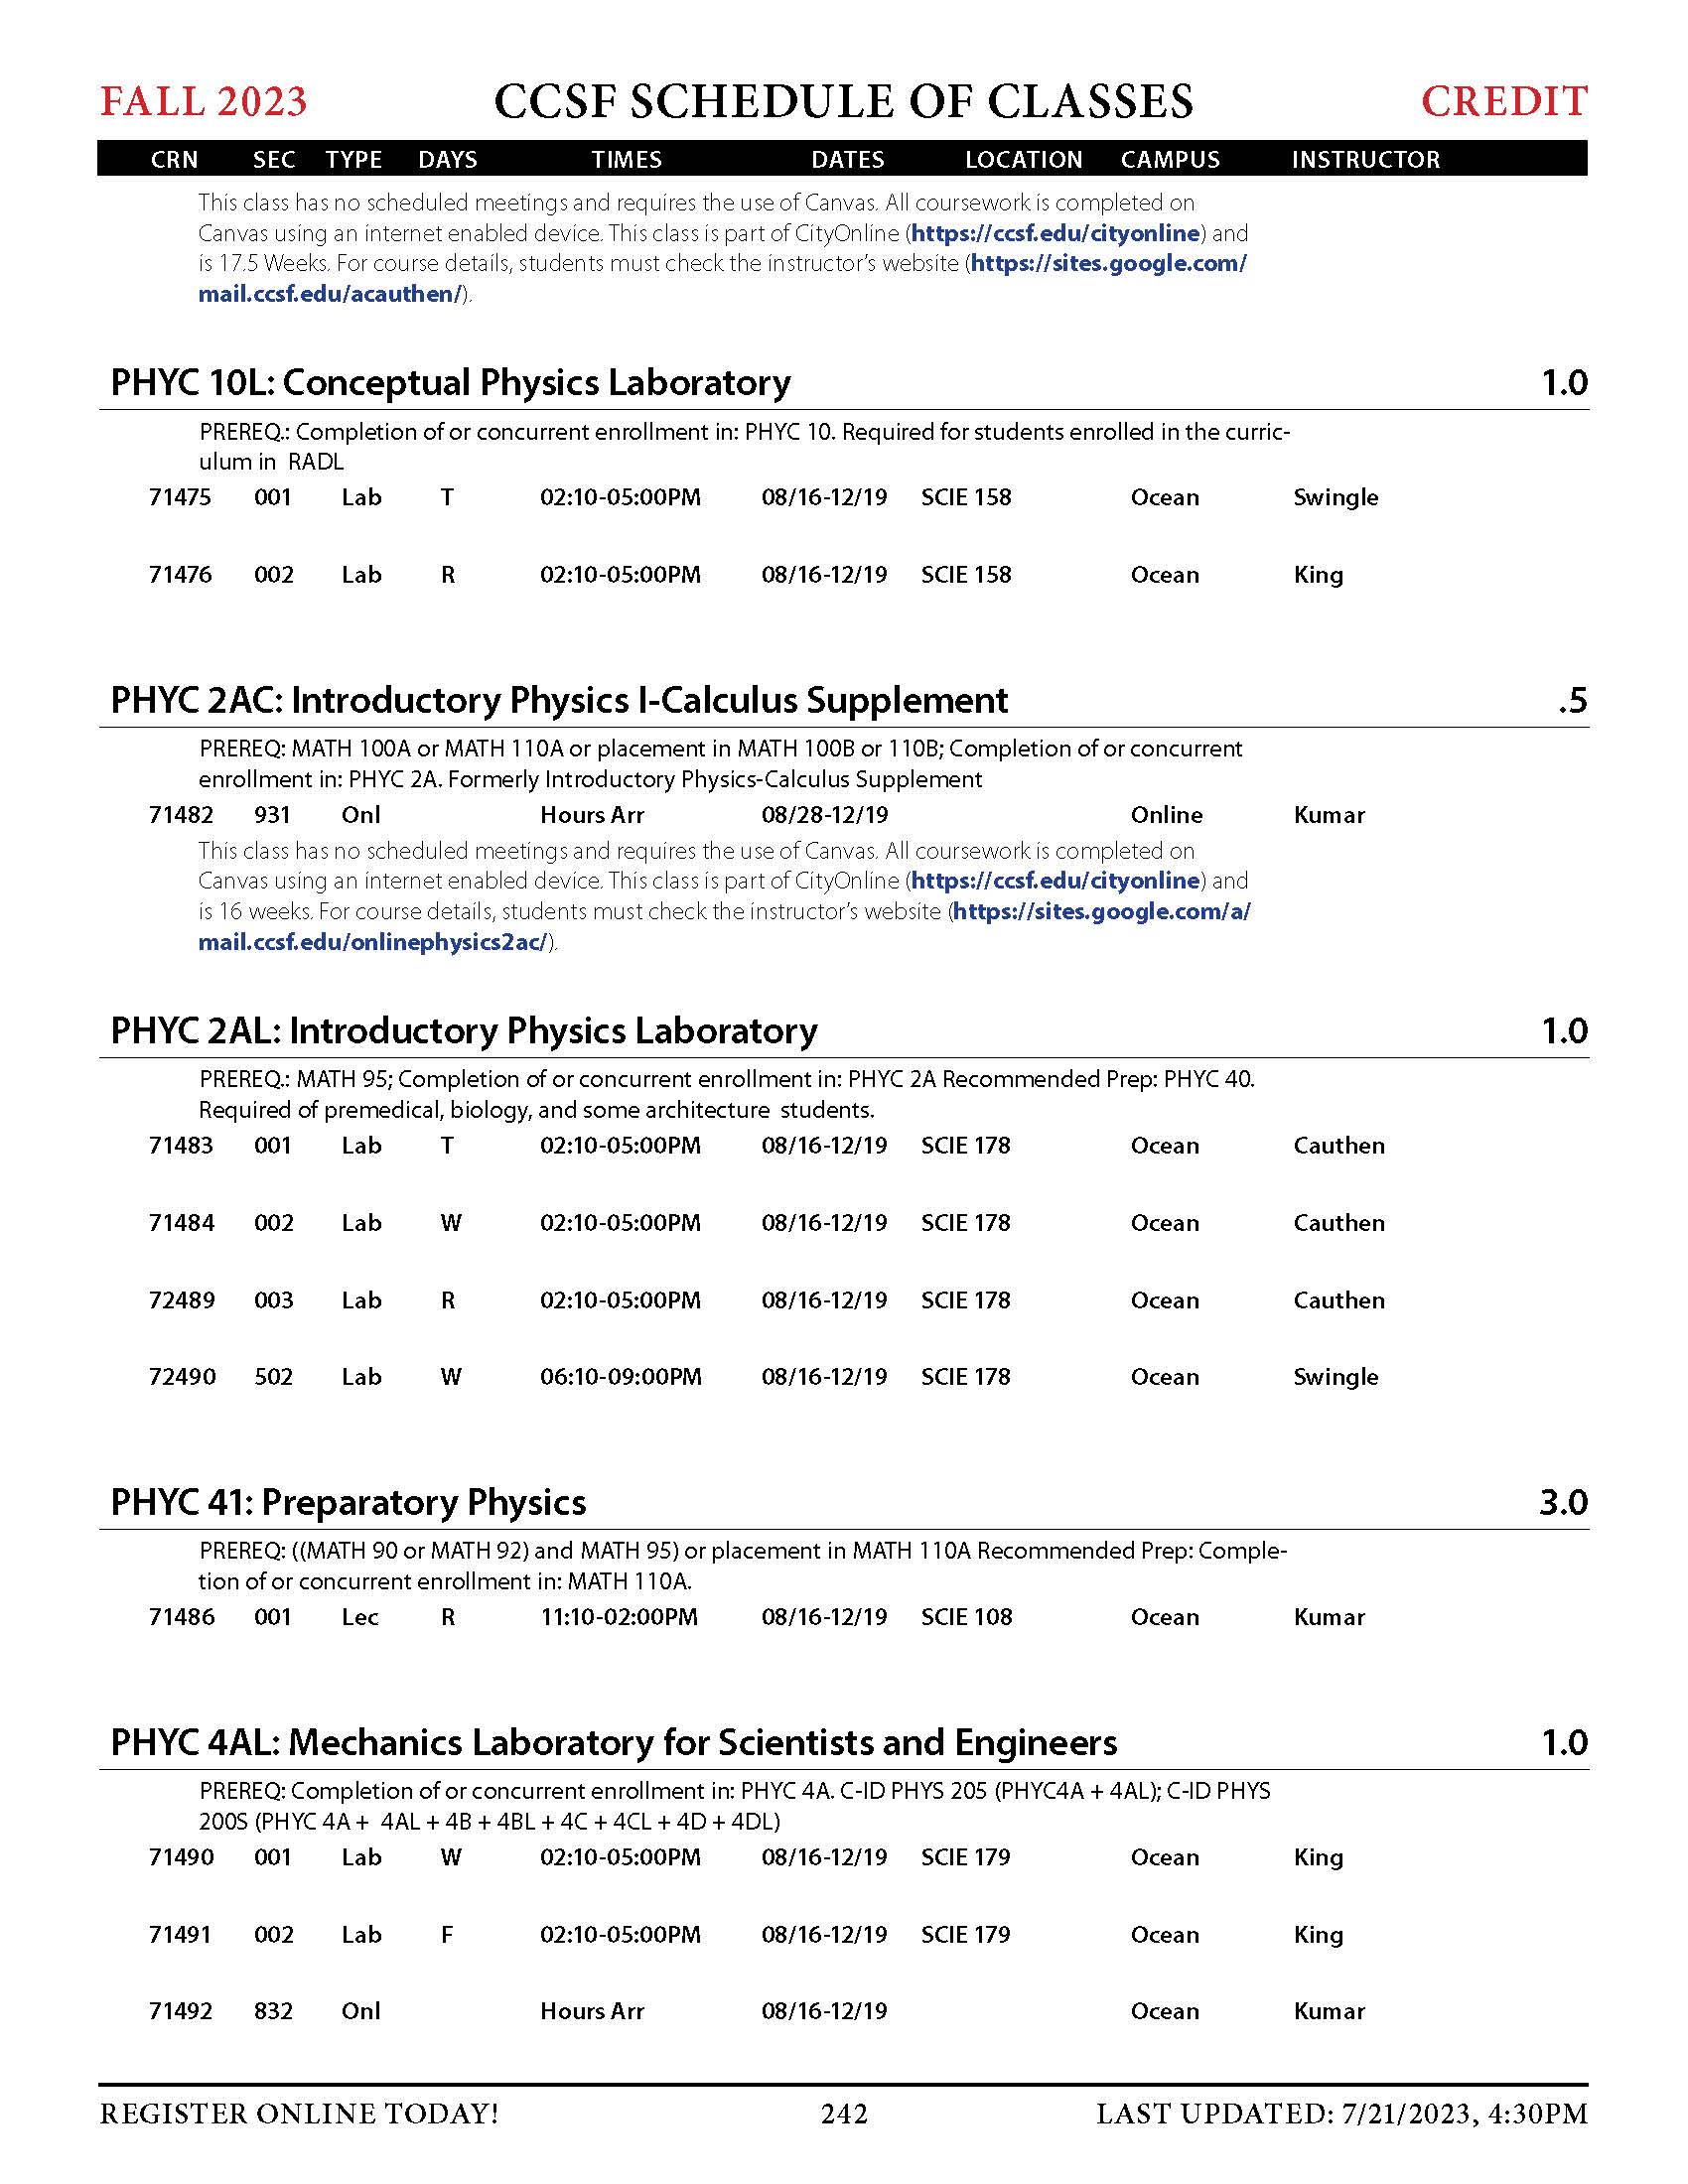 CCSF Physics fall-2023-credit-classes_Page_3